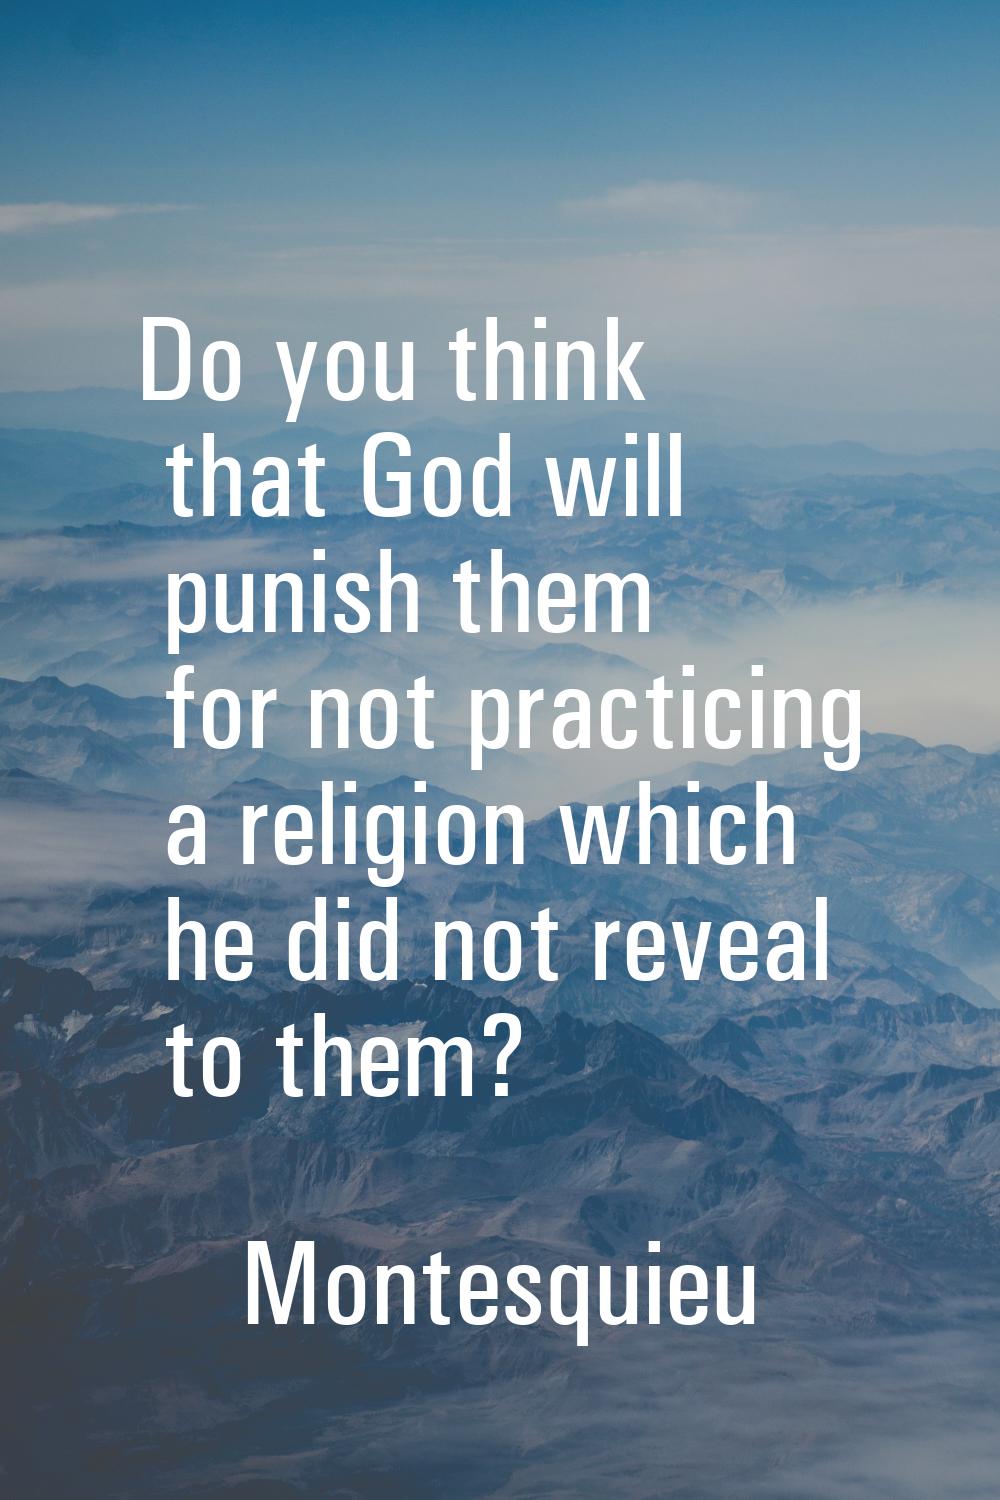 Do you think that God will punish them for not practicing a religion which he did not reveal to the